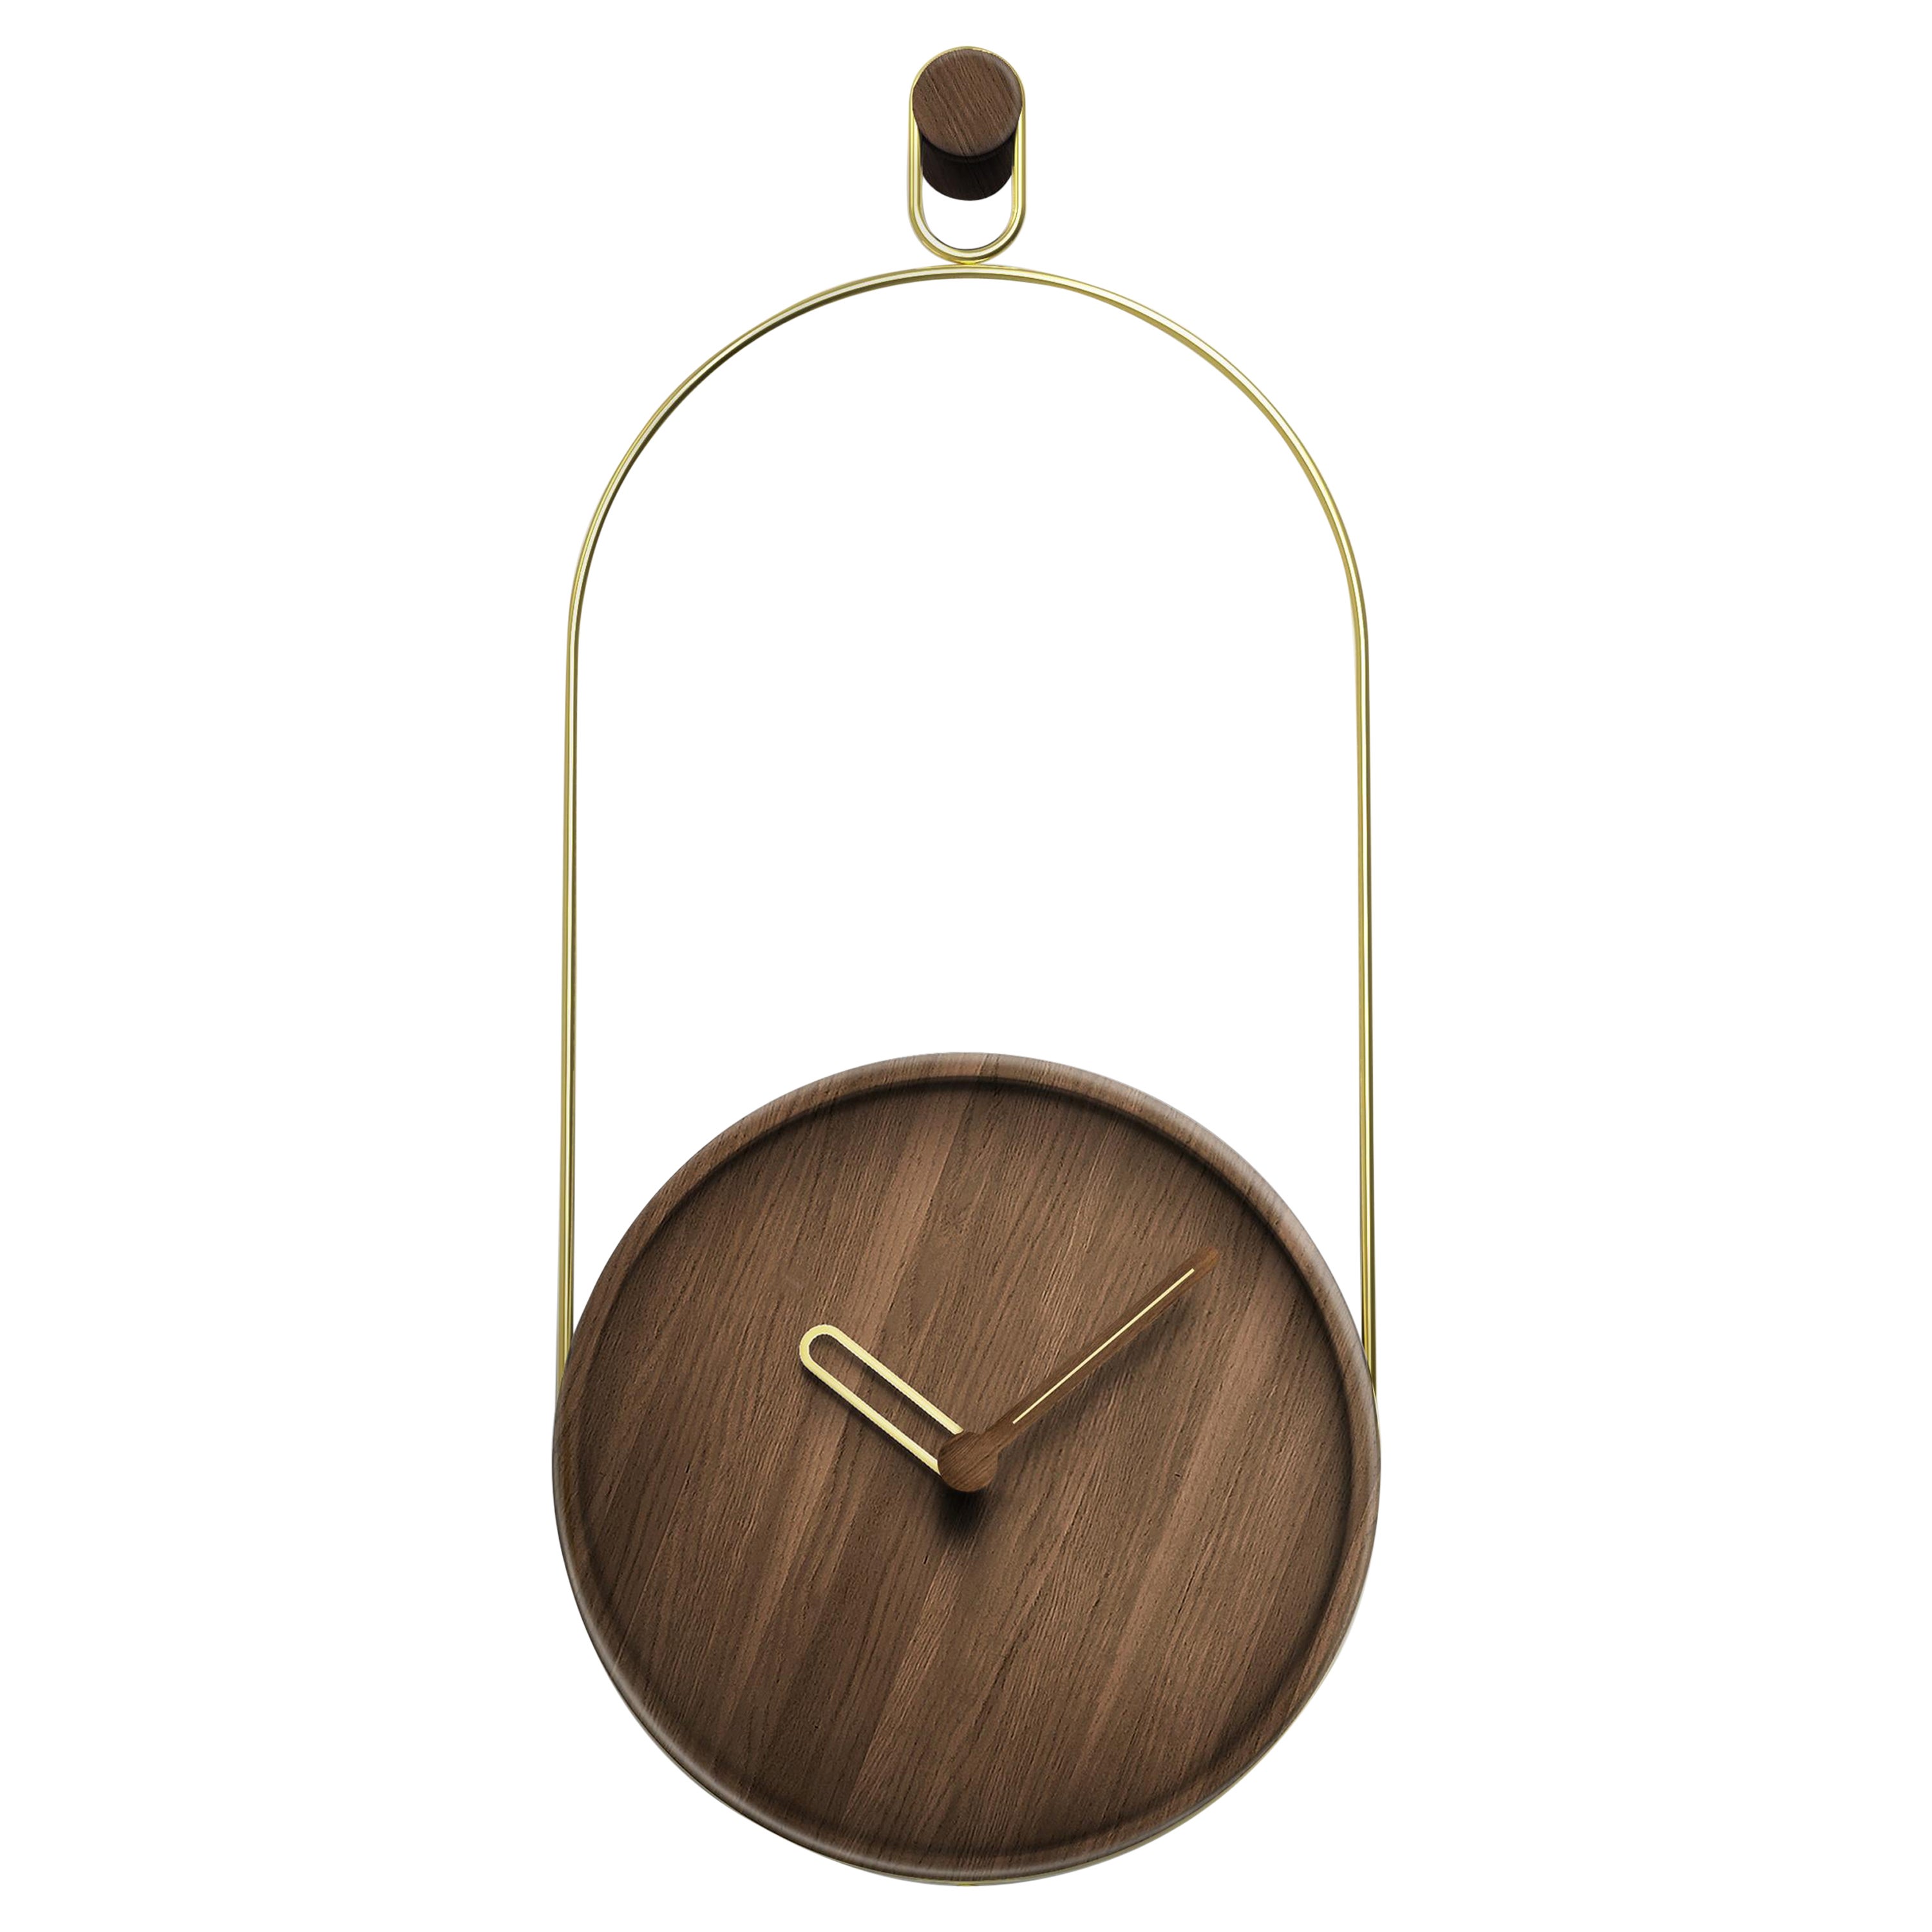 Nomon Eslabon Wall Clock  By Andres Martinez For Sale